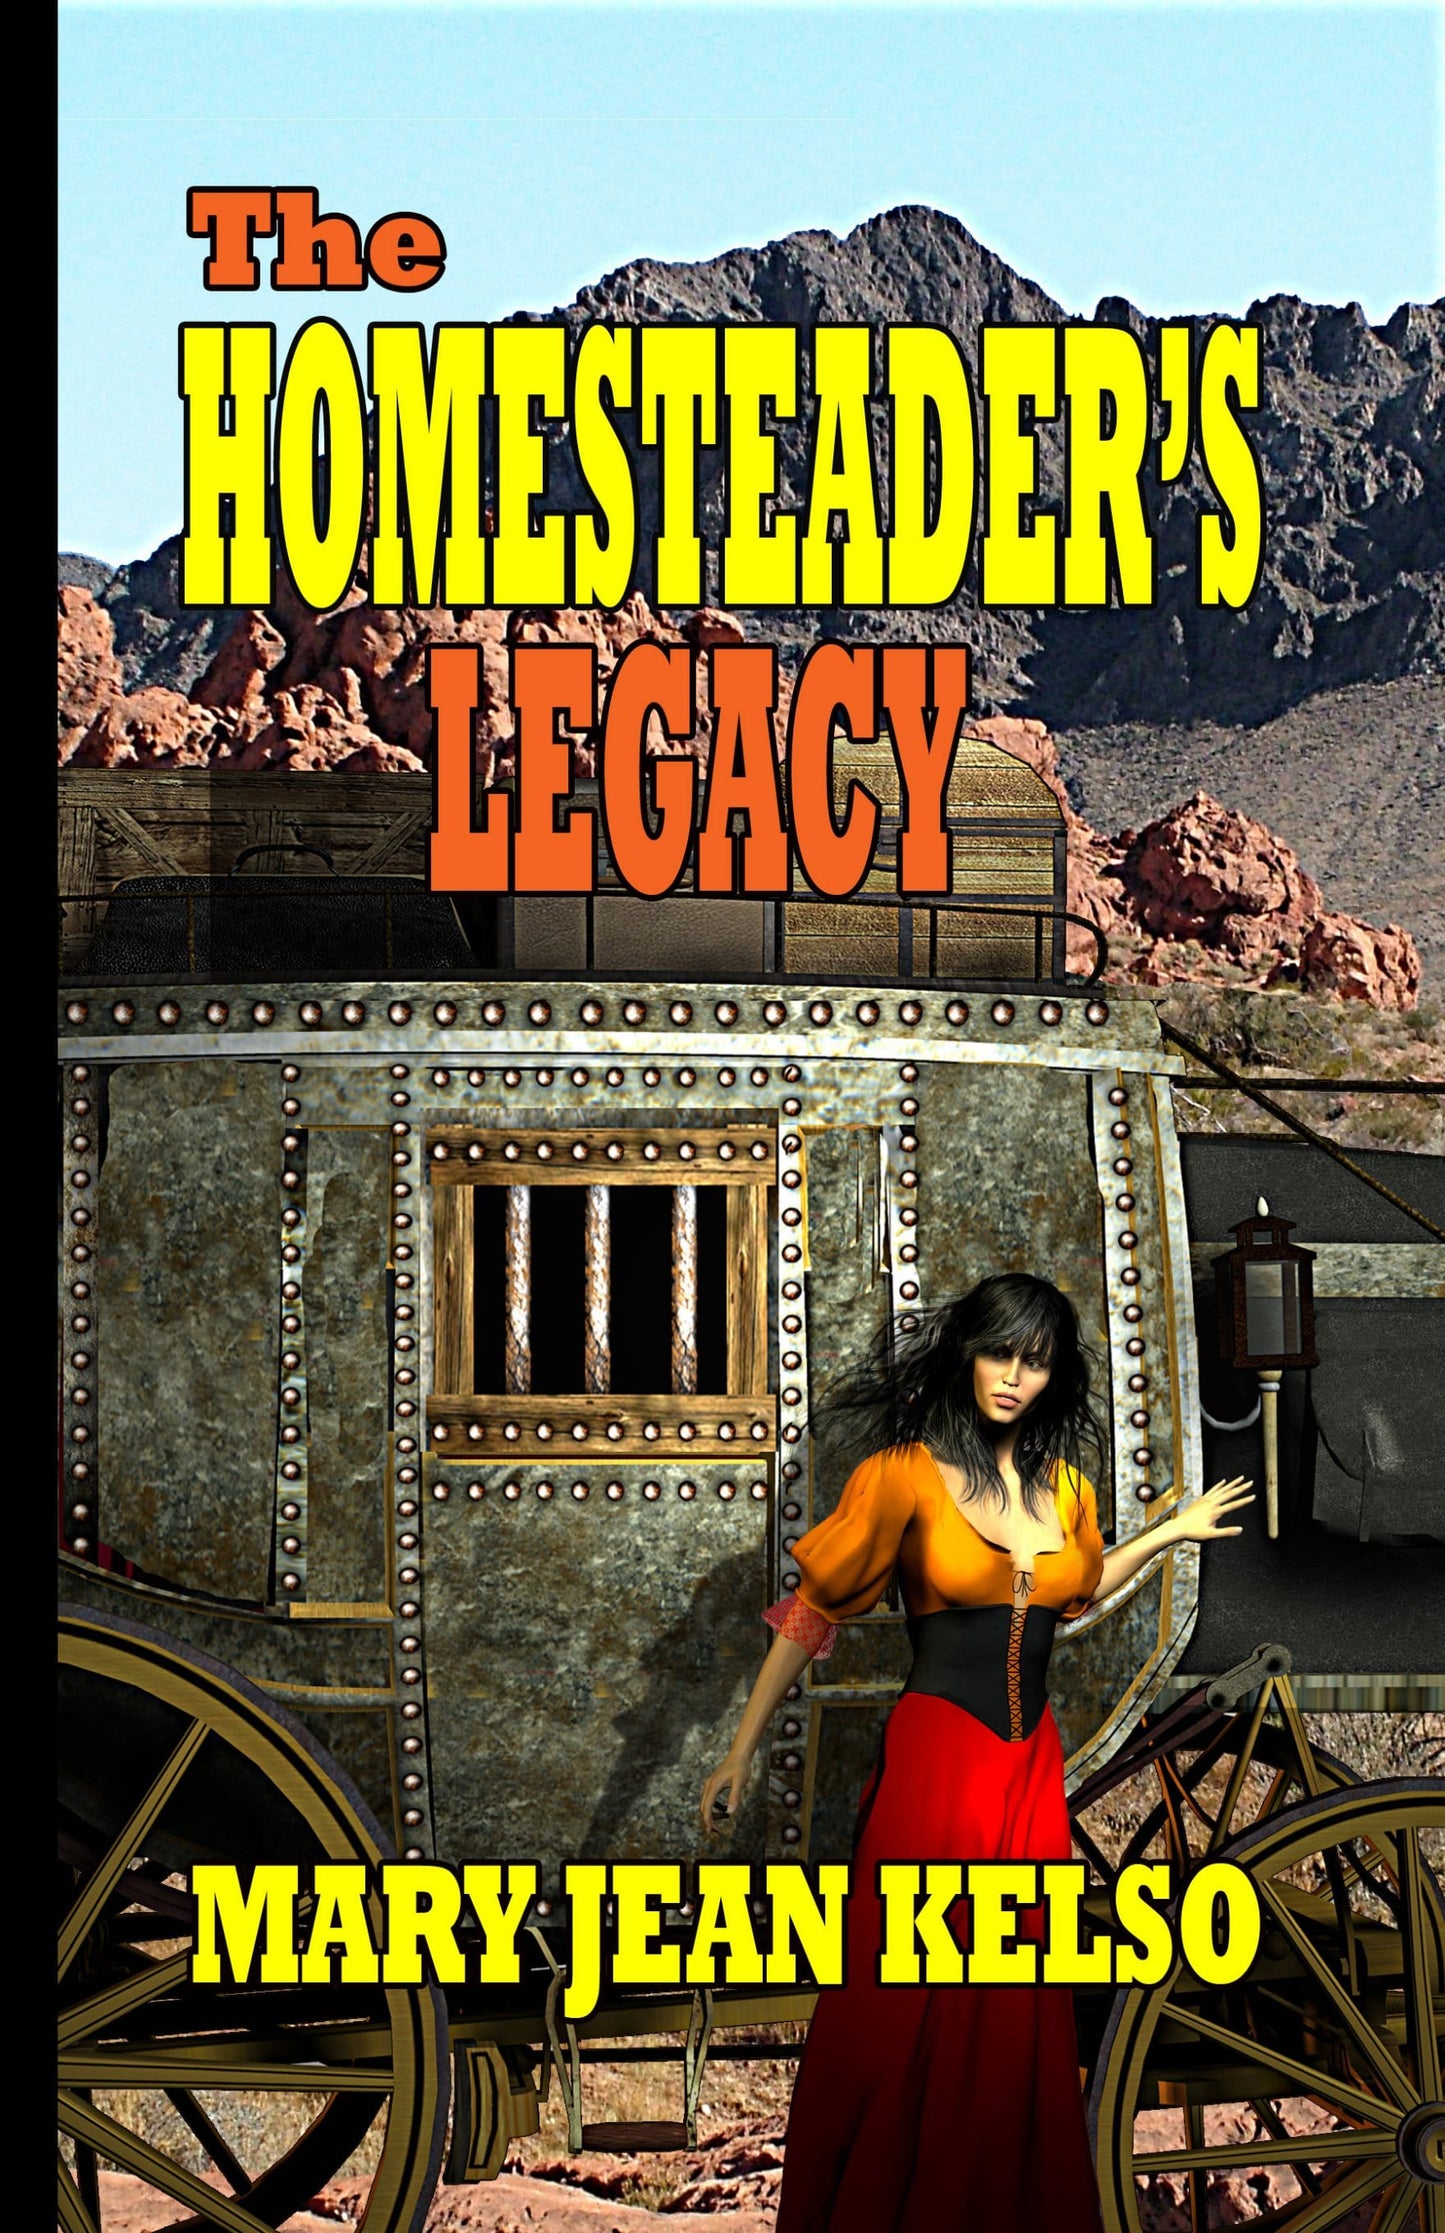 The Homesteader's Legacy (The Homesteader Series Book 2)